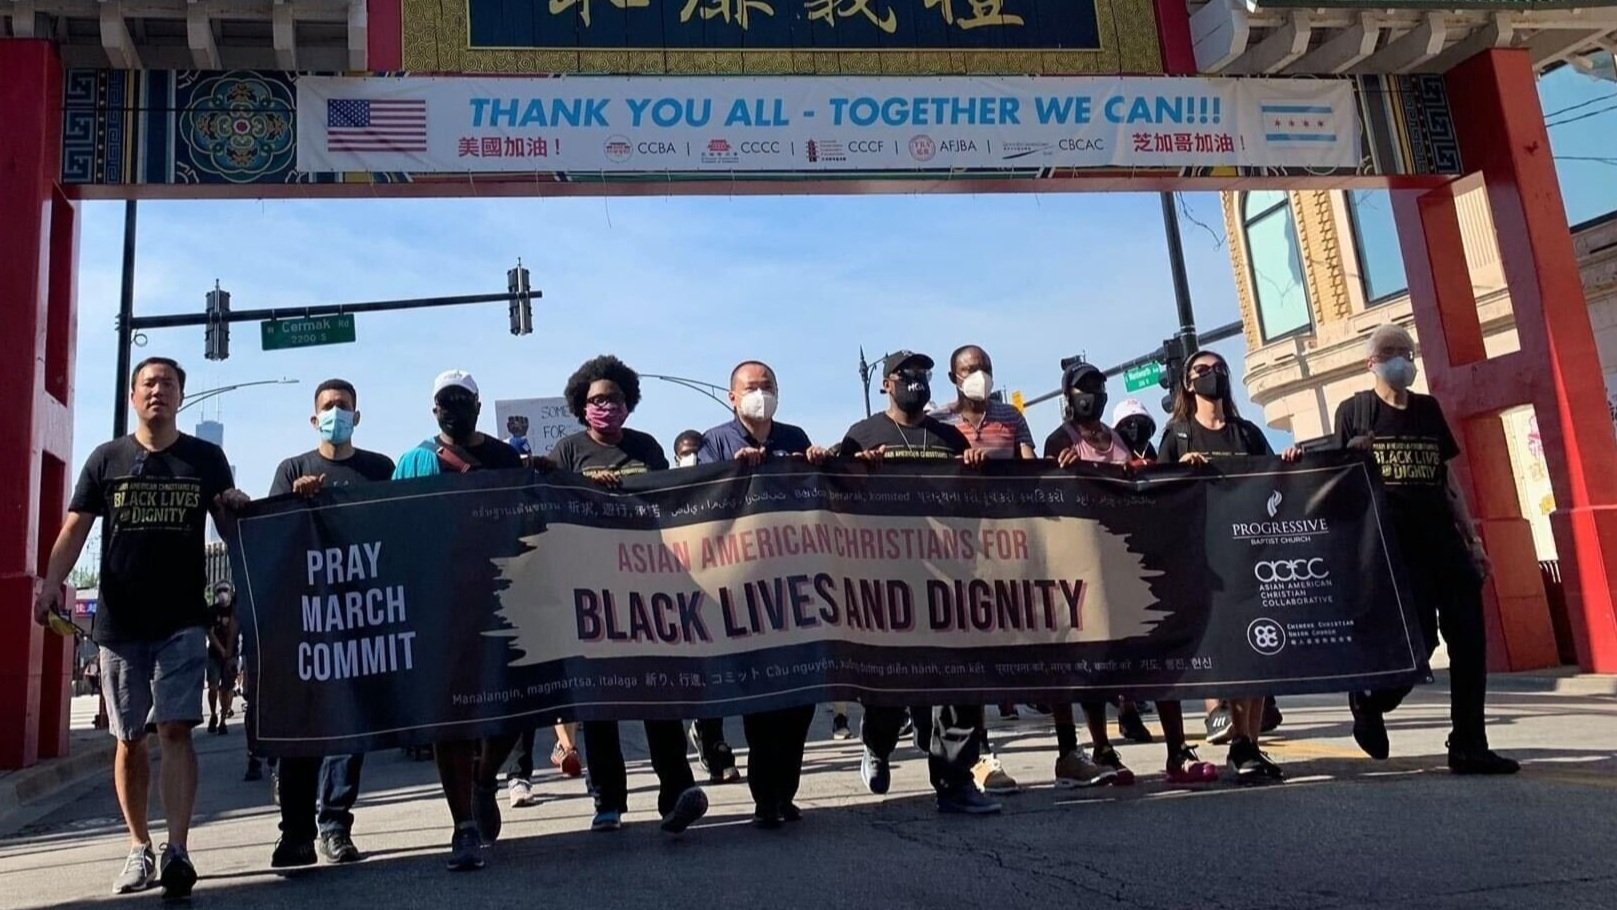 March for Black Lives and Dignity @ June 28, 2020 in Chicago